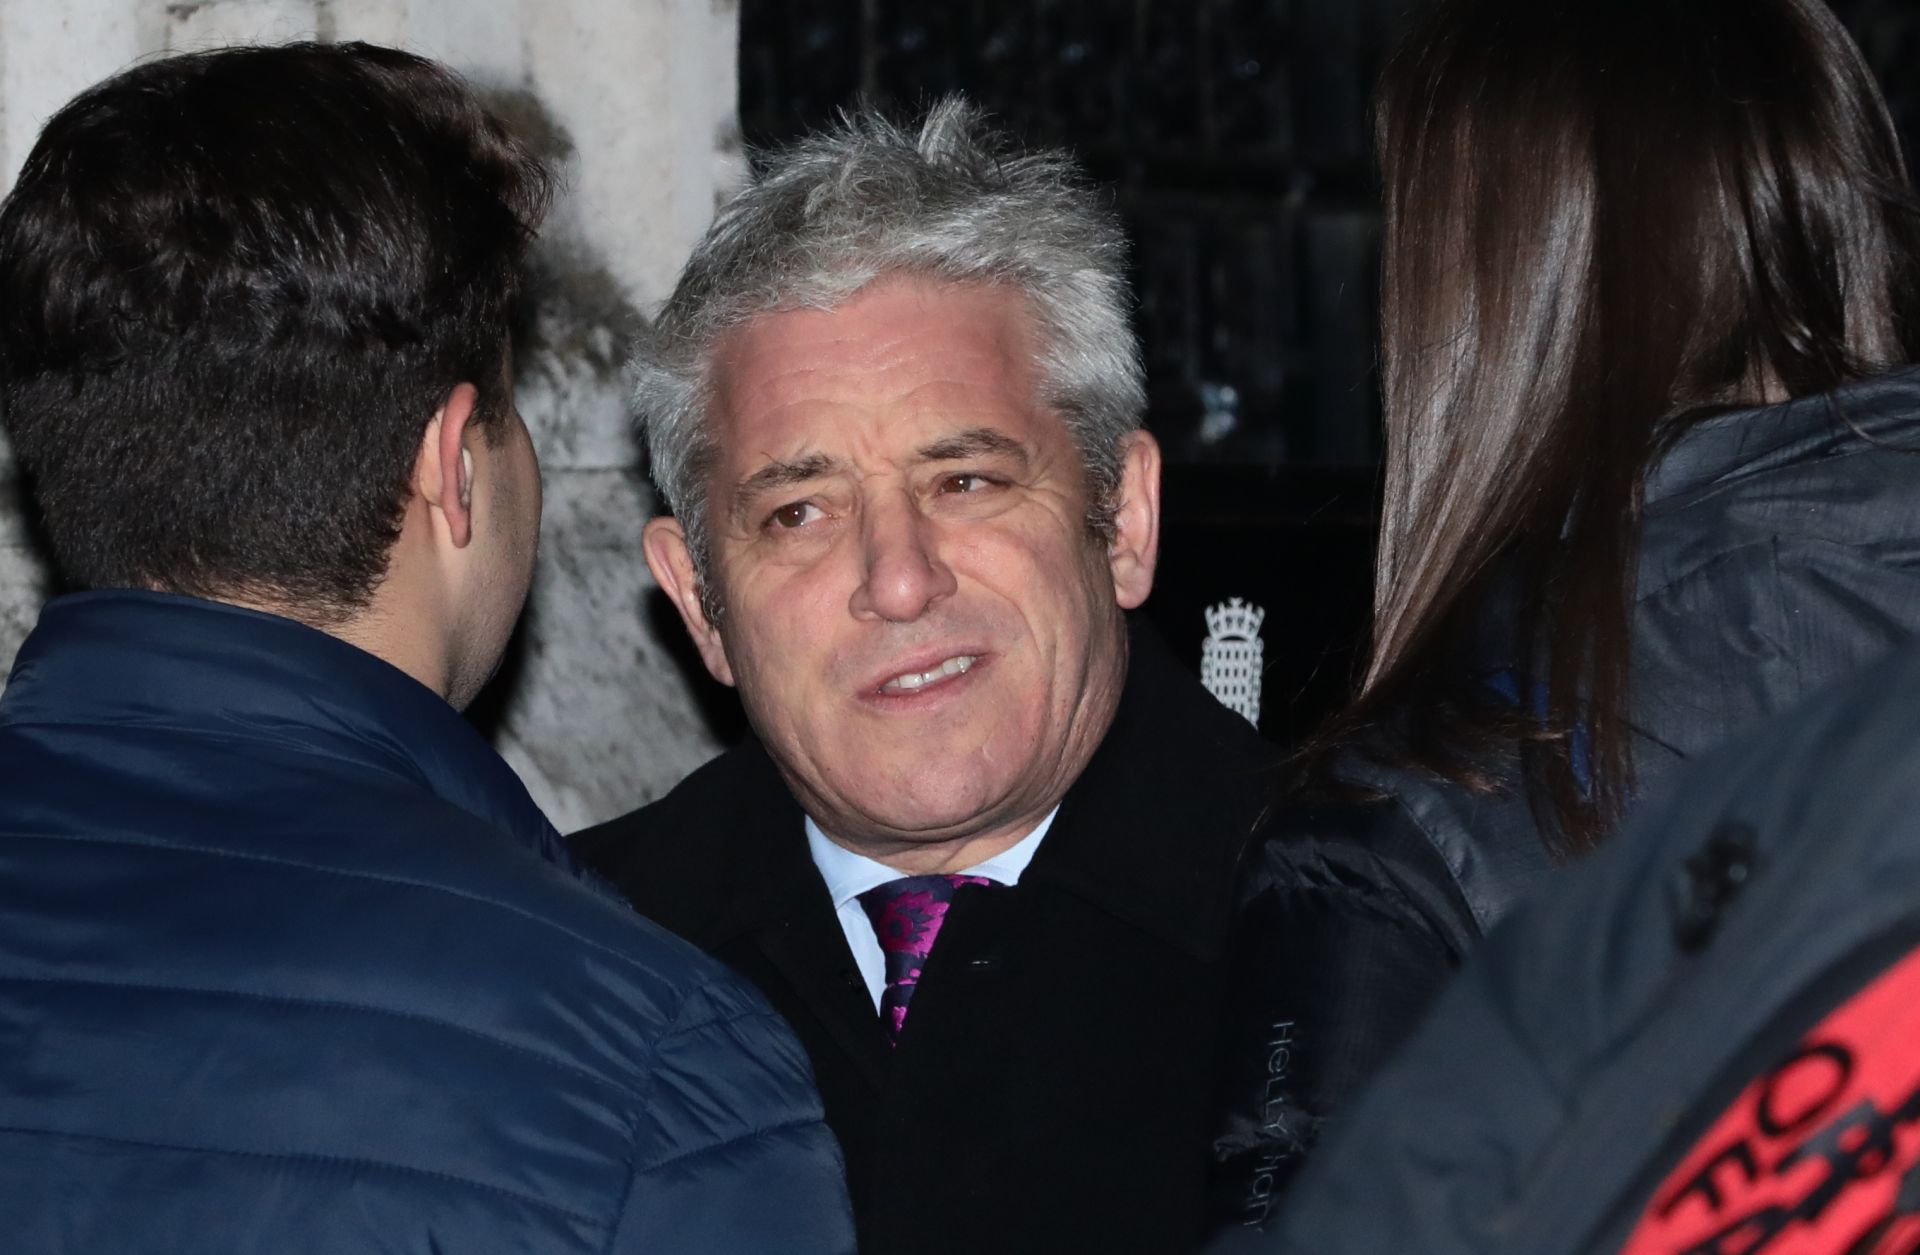 John Bercow, pictured outside Parliament in London on Dec. 12, 2018, is speaker of the House of Commons.